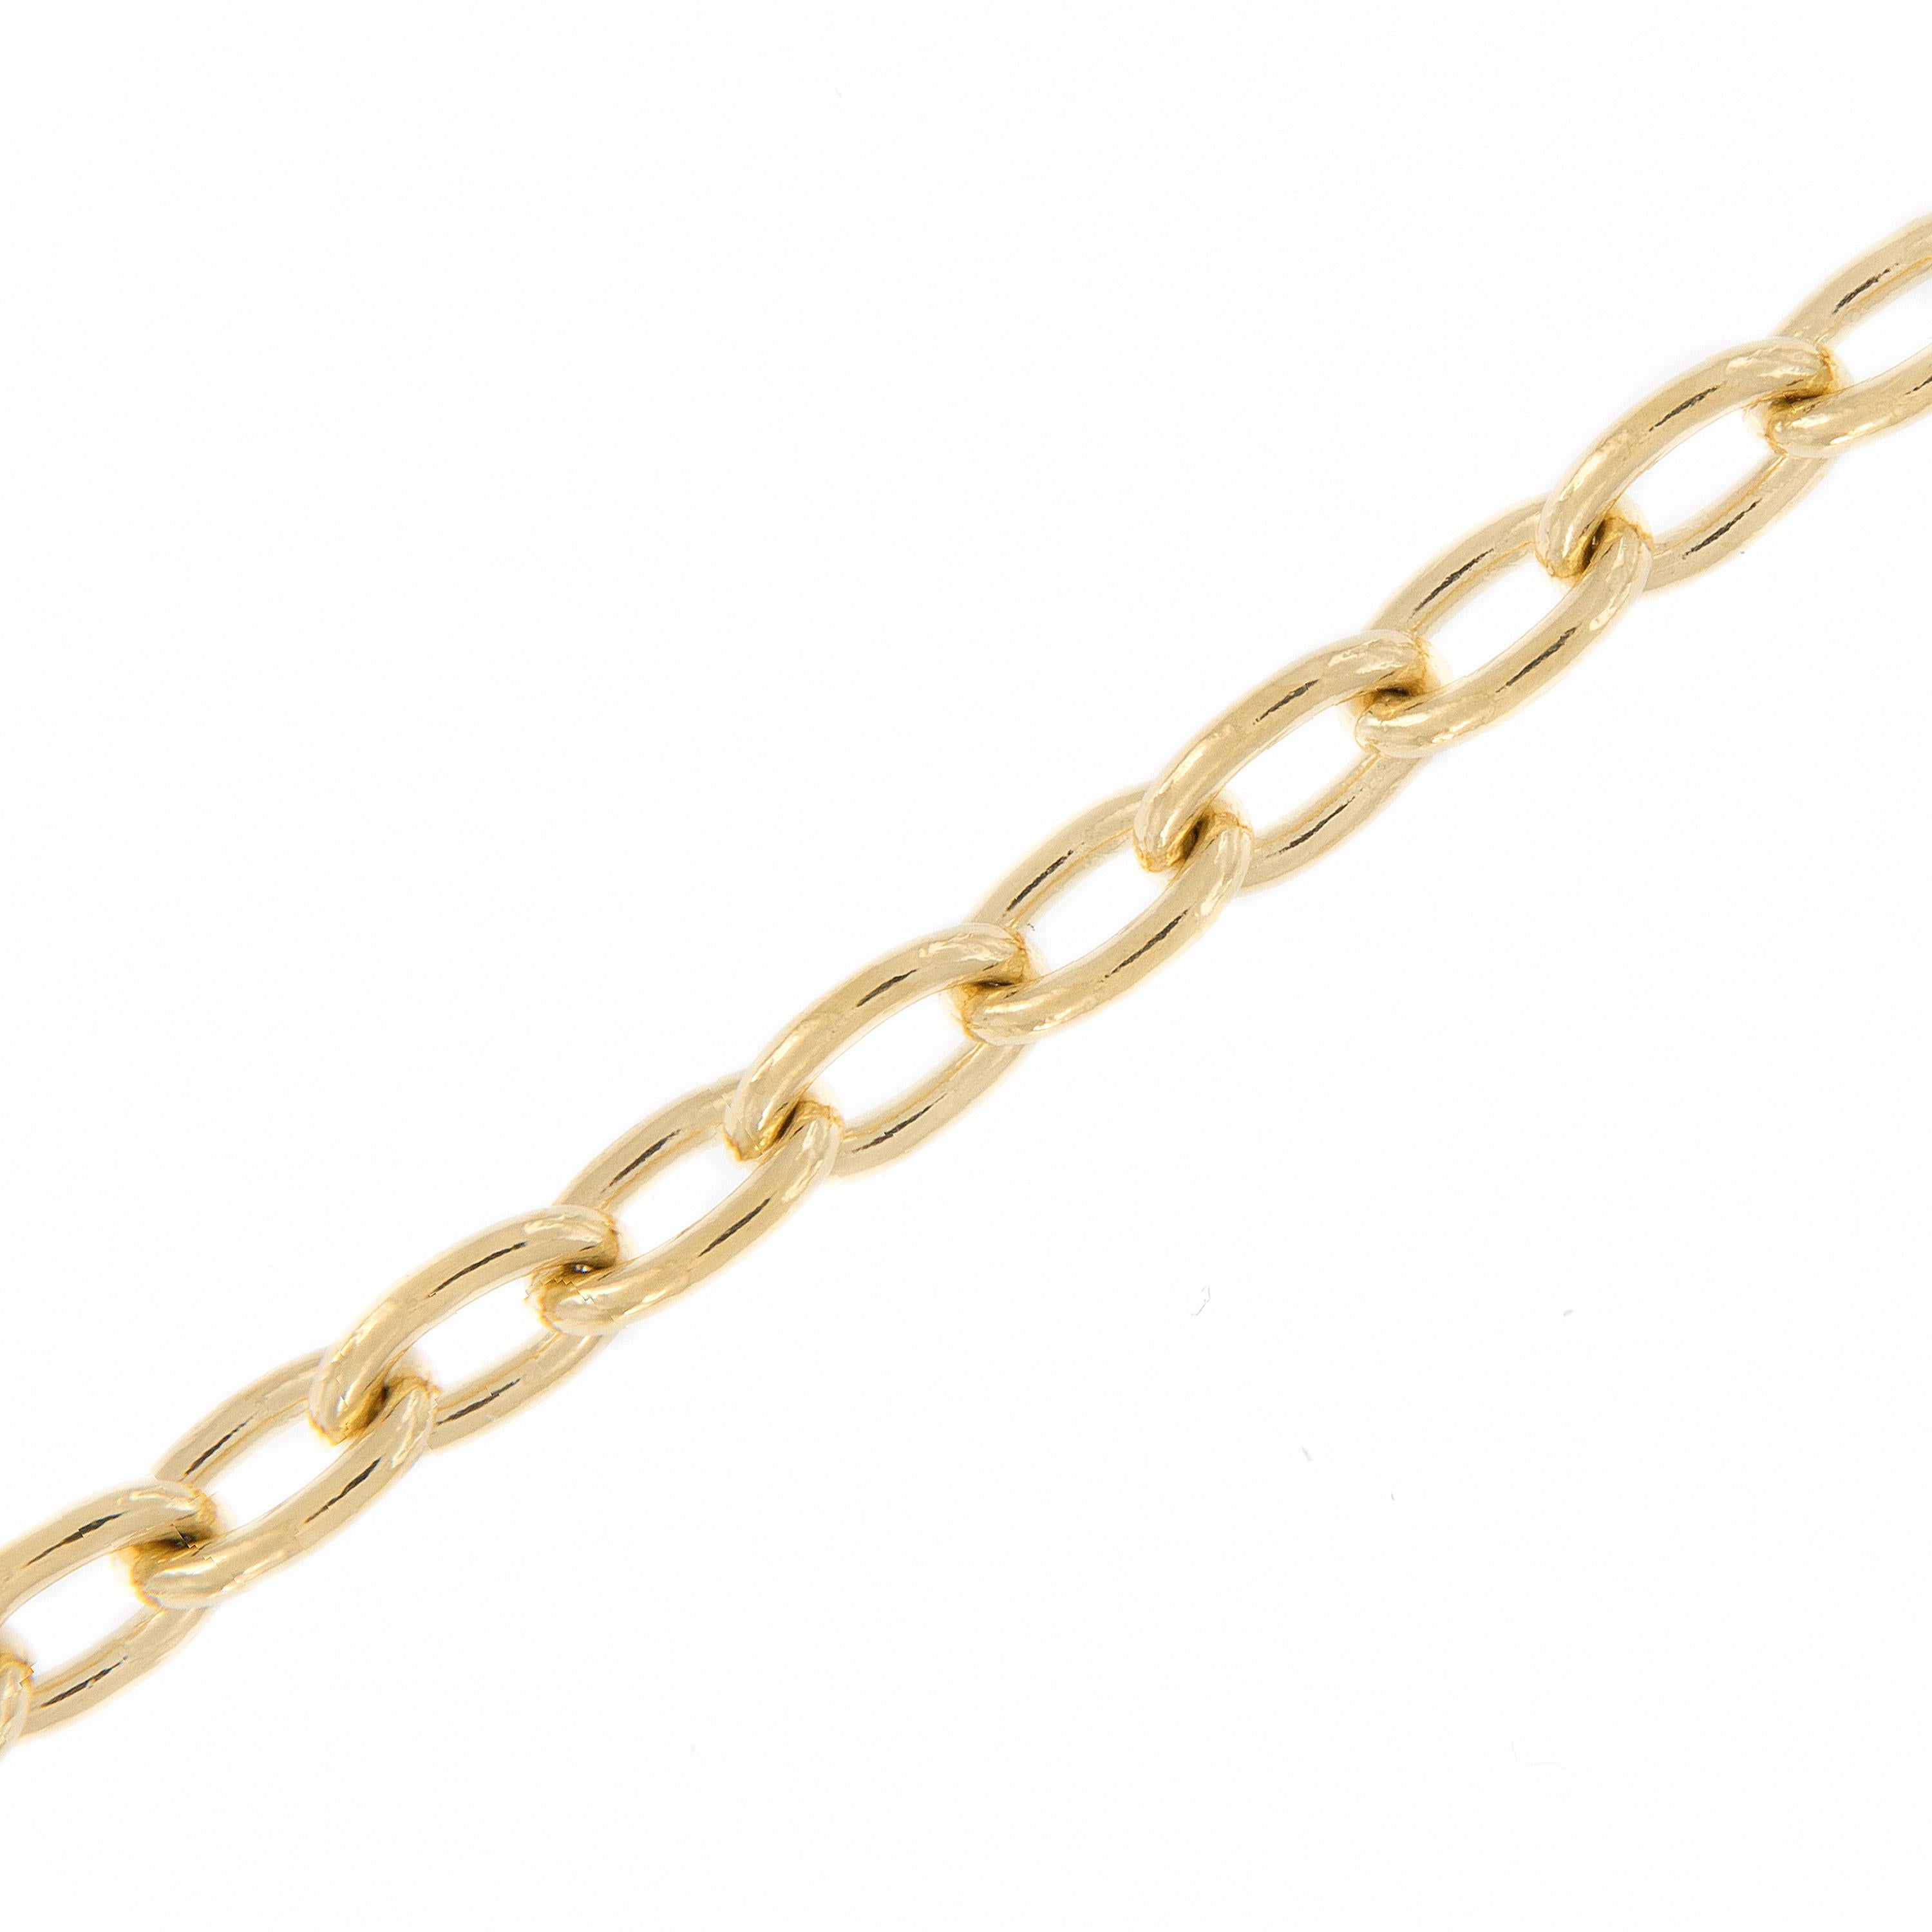 Beautiful handcrafted Italian 18k gold smooth oval link chain necklace with a lobster clasp. necklace is 18 inches long. Weighs 11.2 grams.